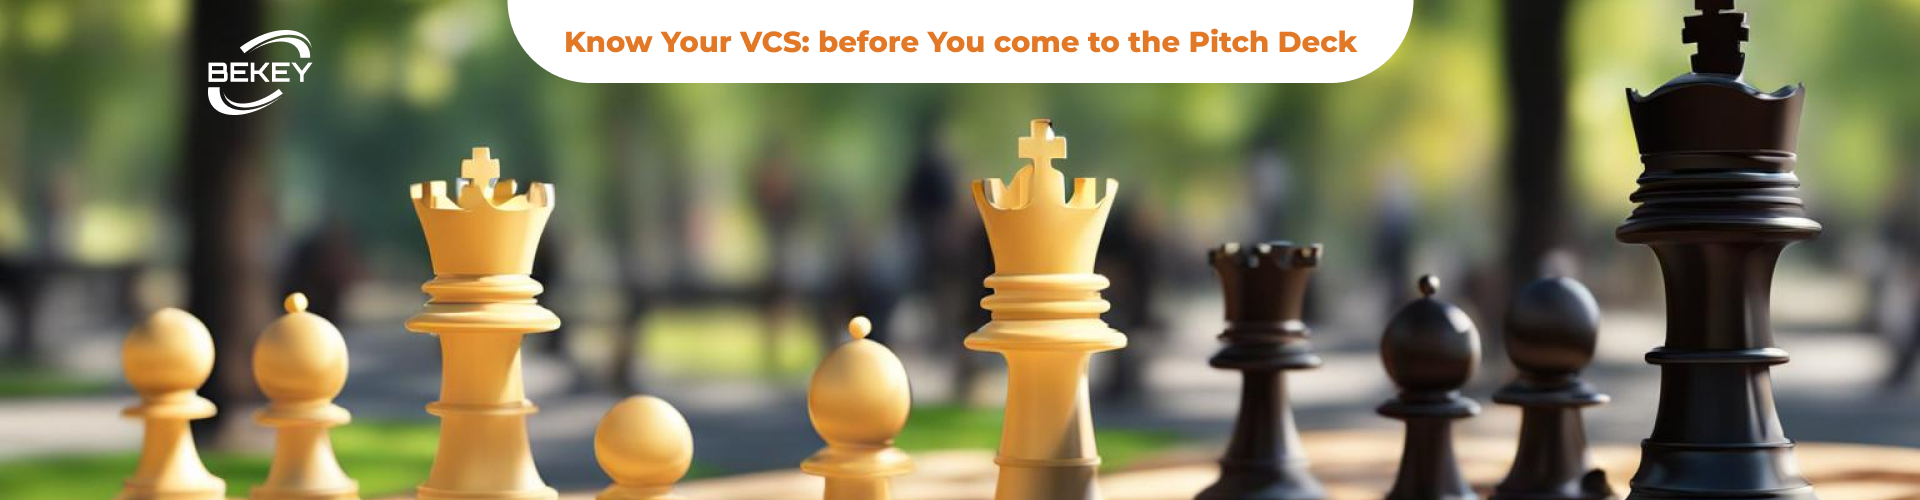 Know your VCs - before you come to the pitch deck 